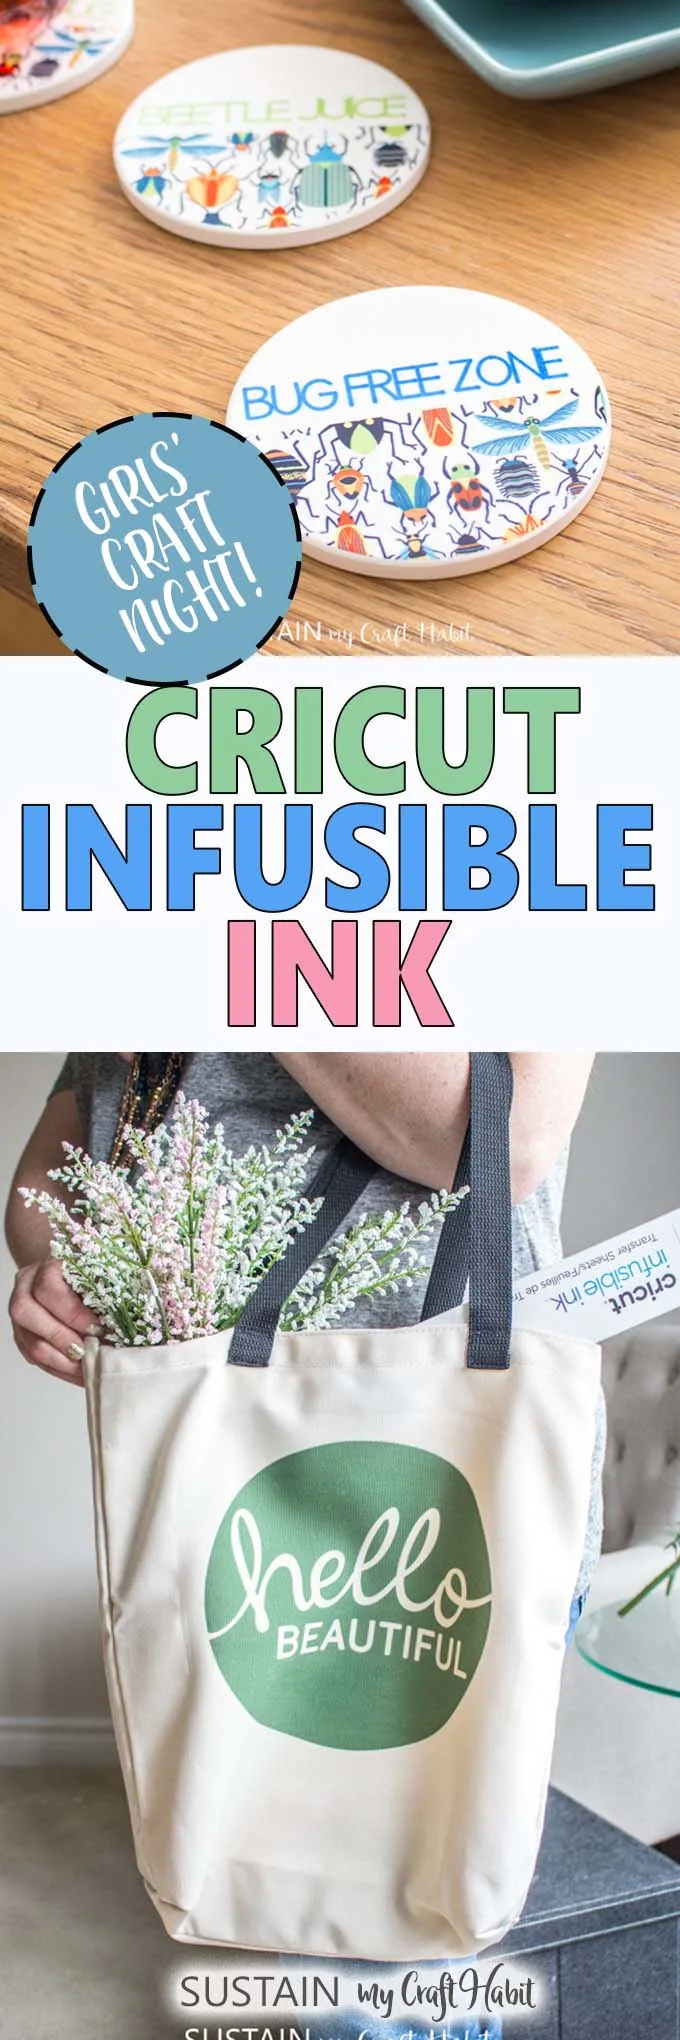 Cricut Infusible Ink on Coasters and Tote Bag (Girl's Night In